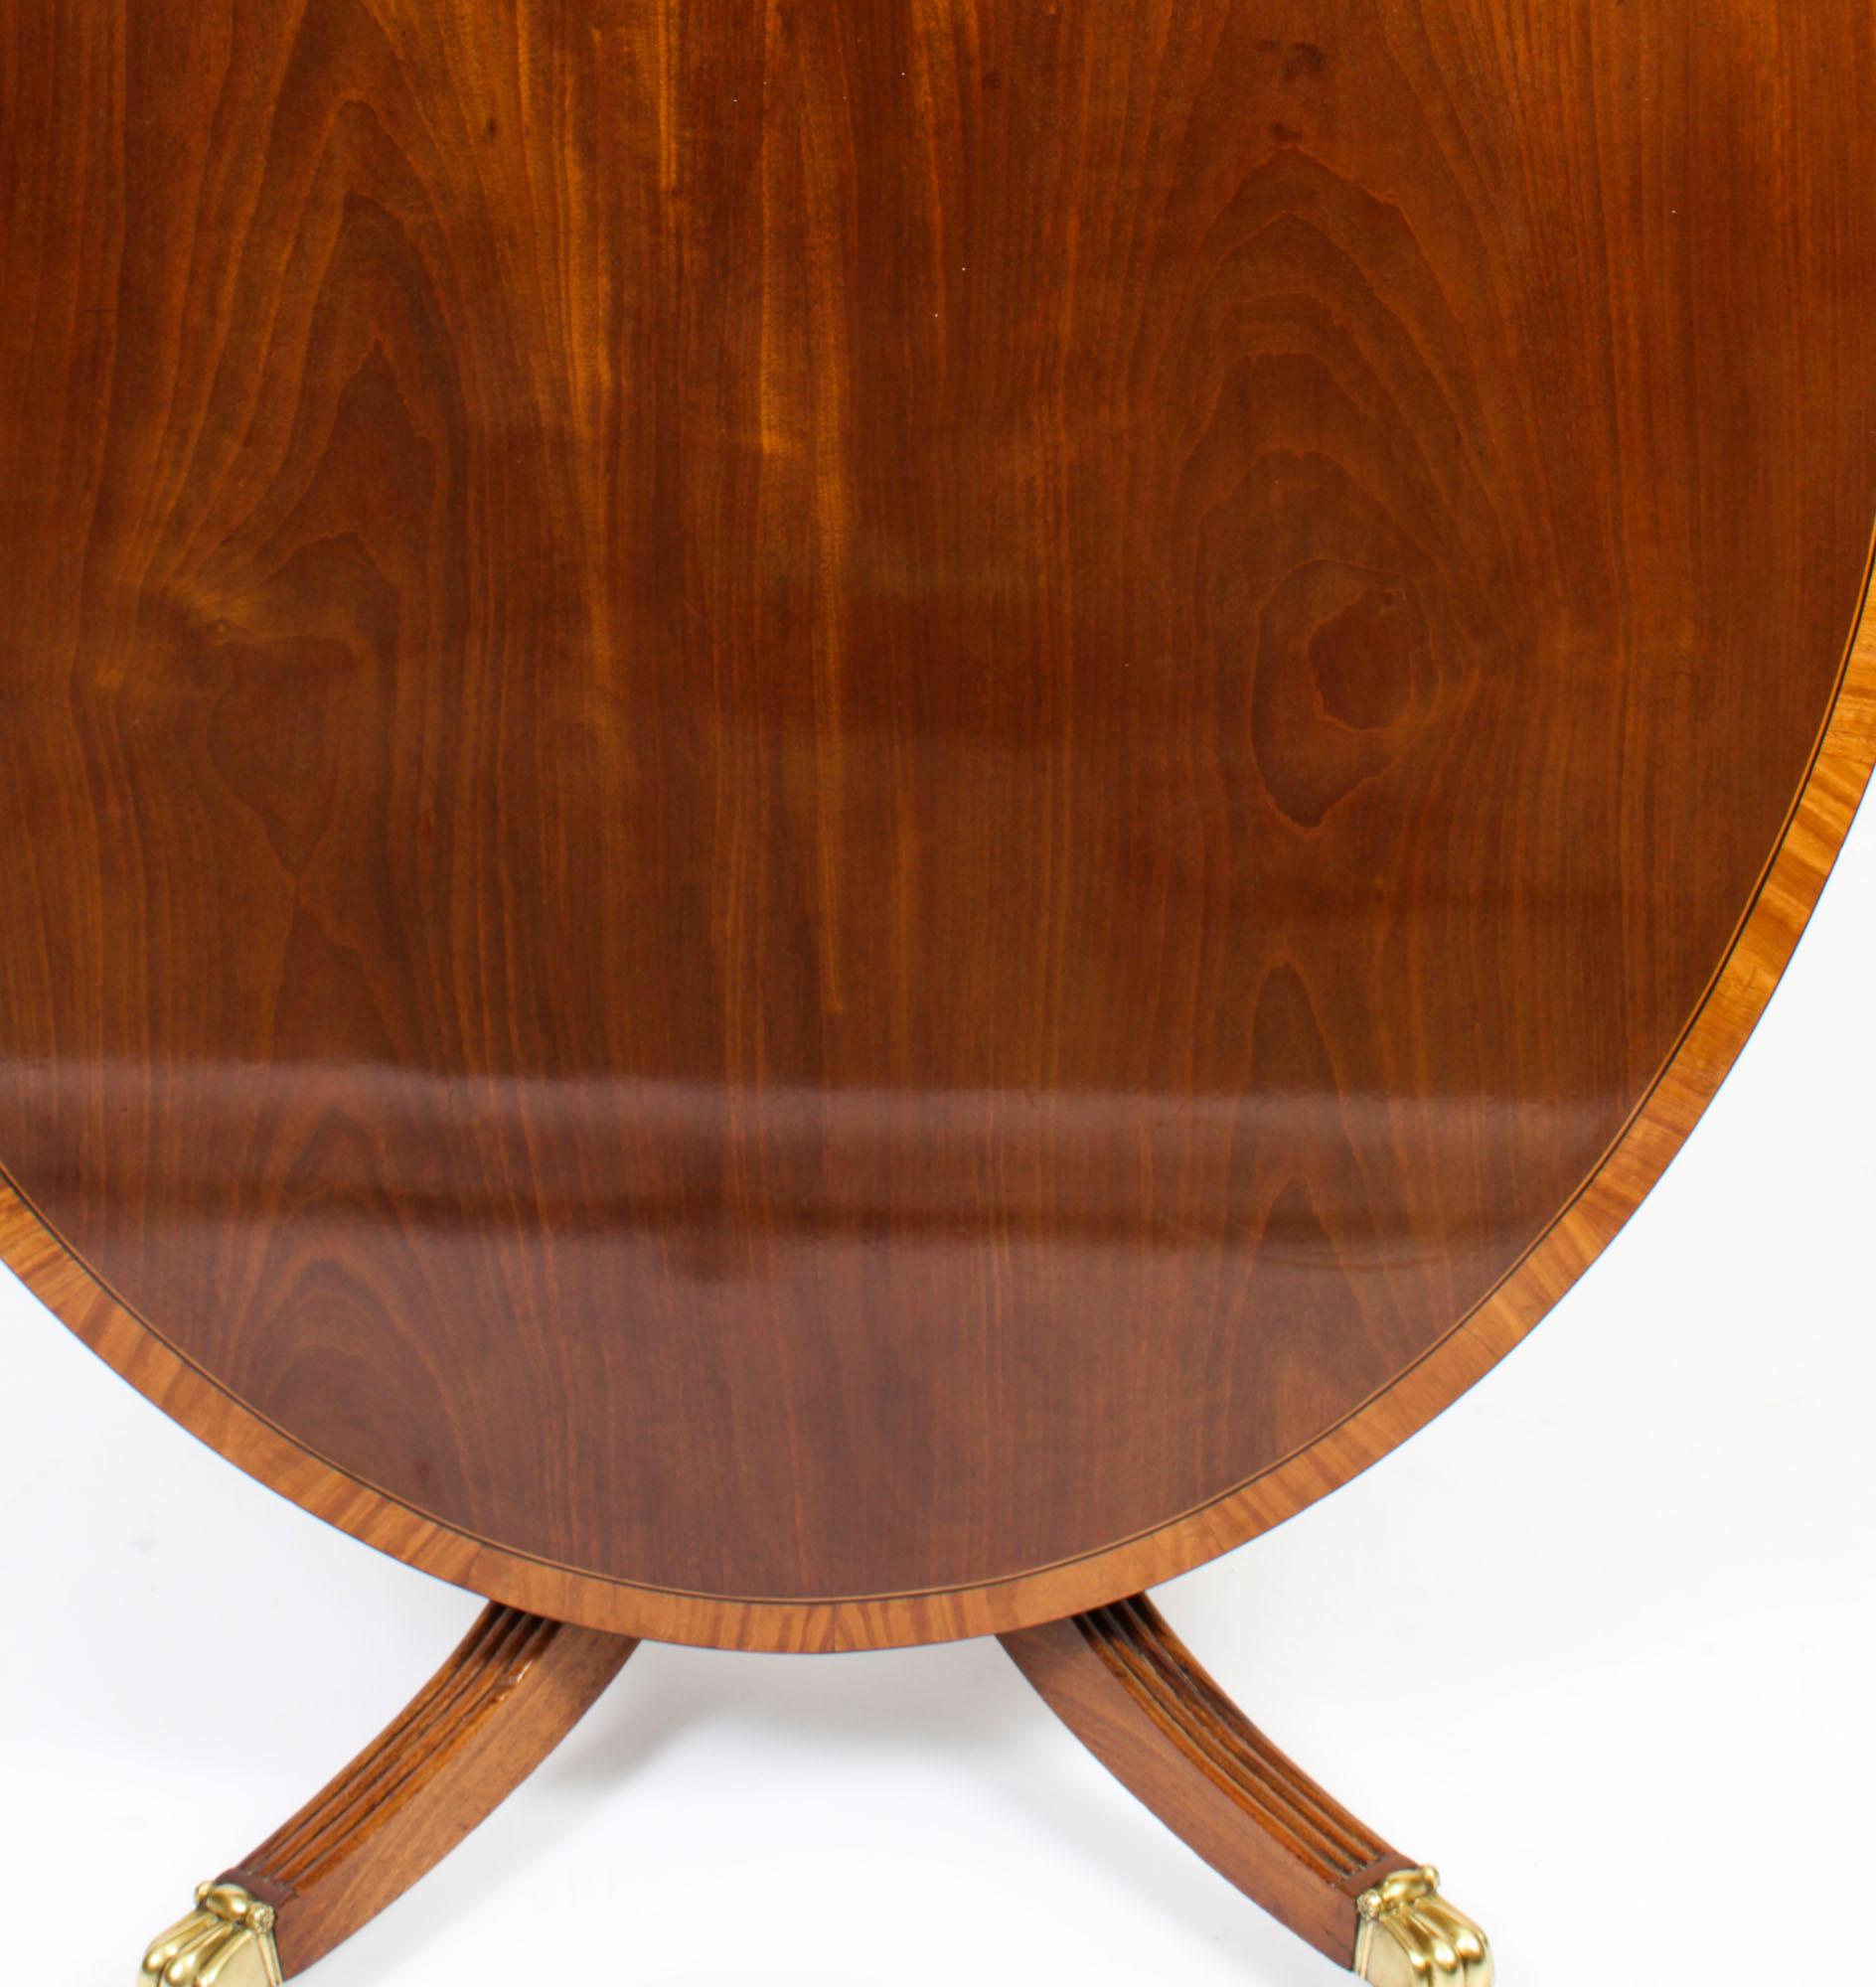 Antique Oval Regency Flame Mahogany Dining Table 19th C For Sale 5